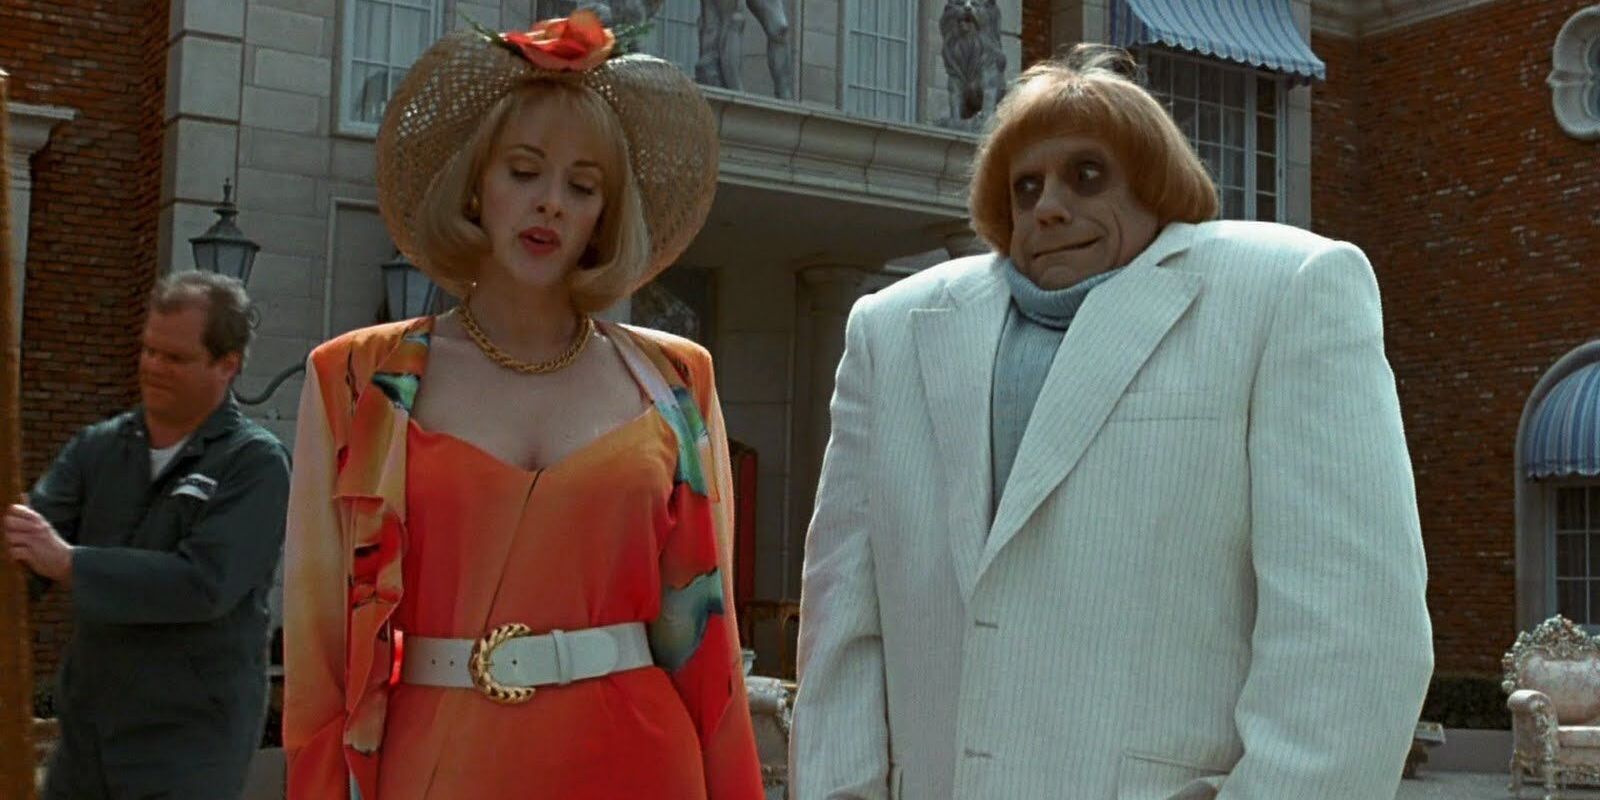 Fester and Debbie after marrying